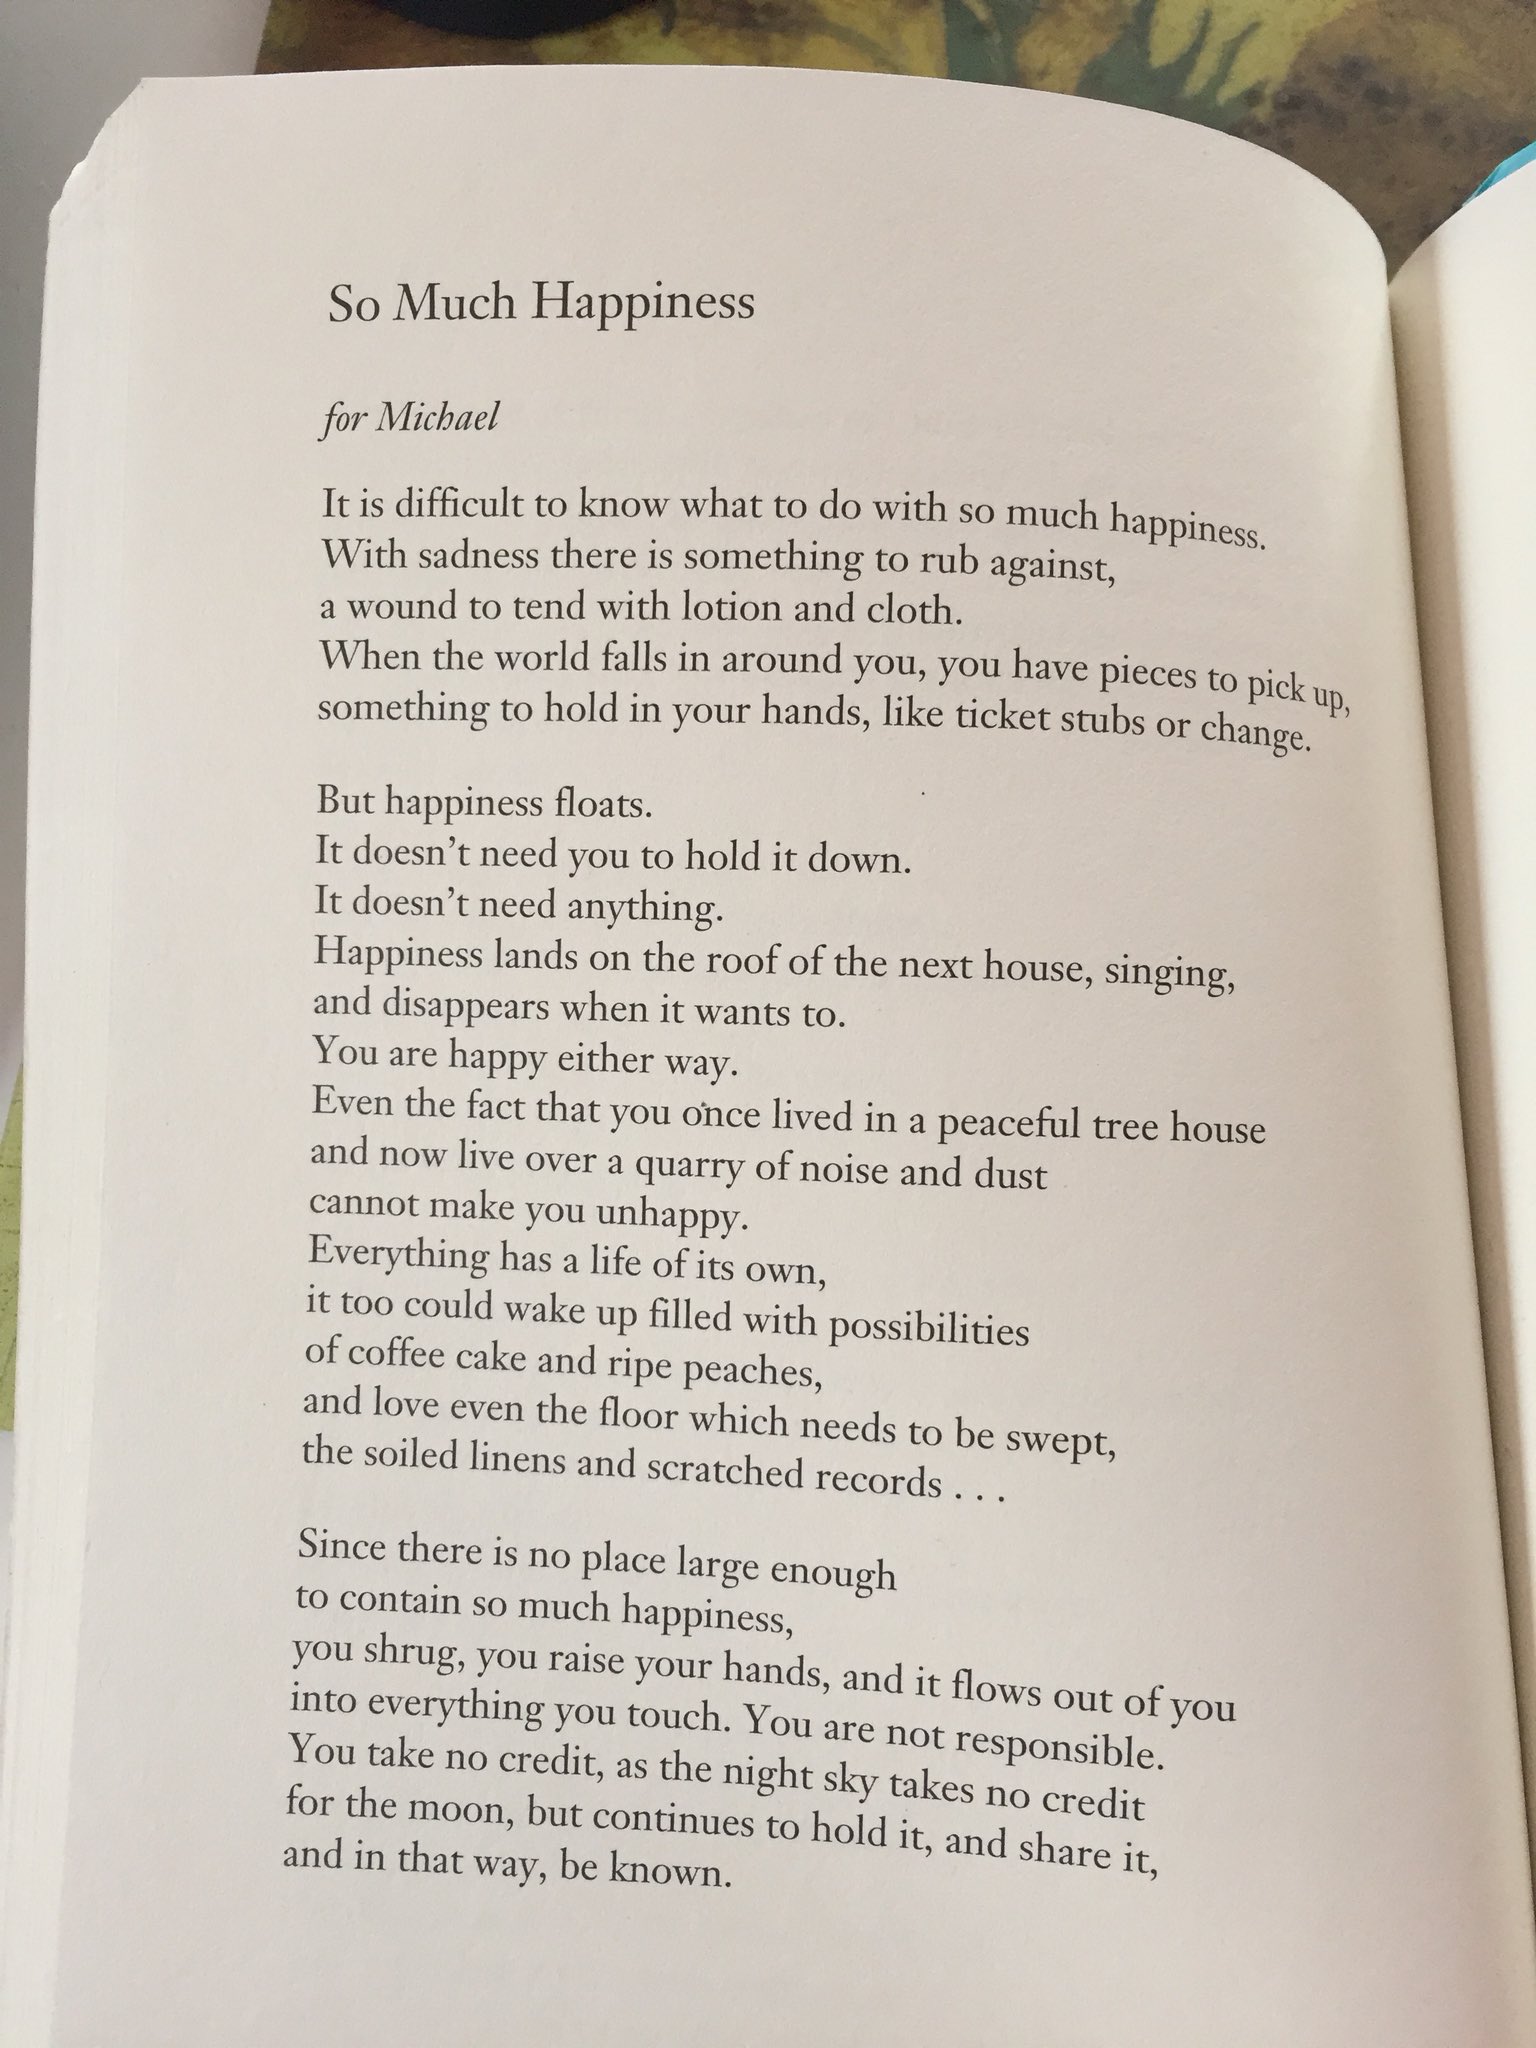 Happy birthday to Naomi Shihab Nye, whose work brings so much happiness... really, so much joy. 